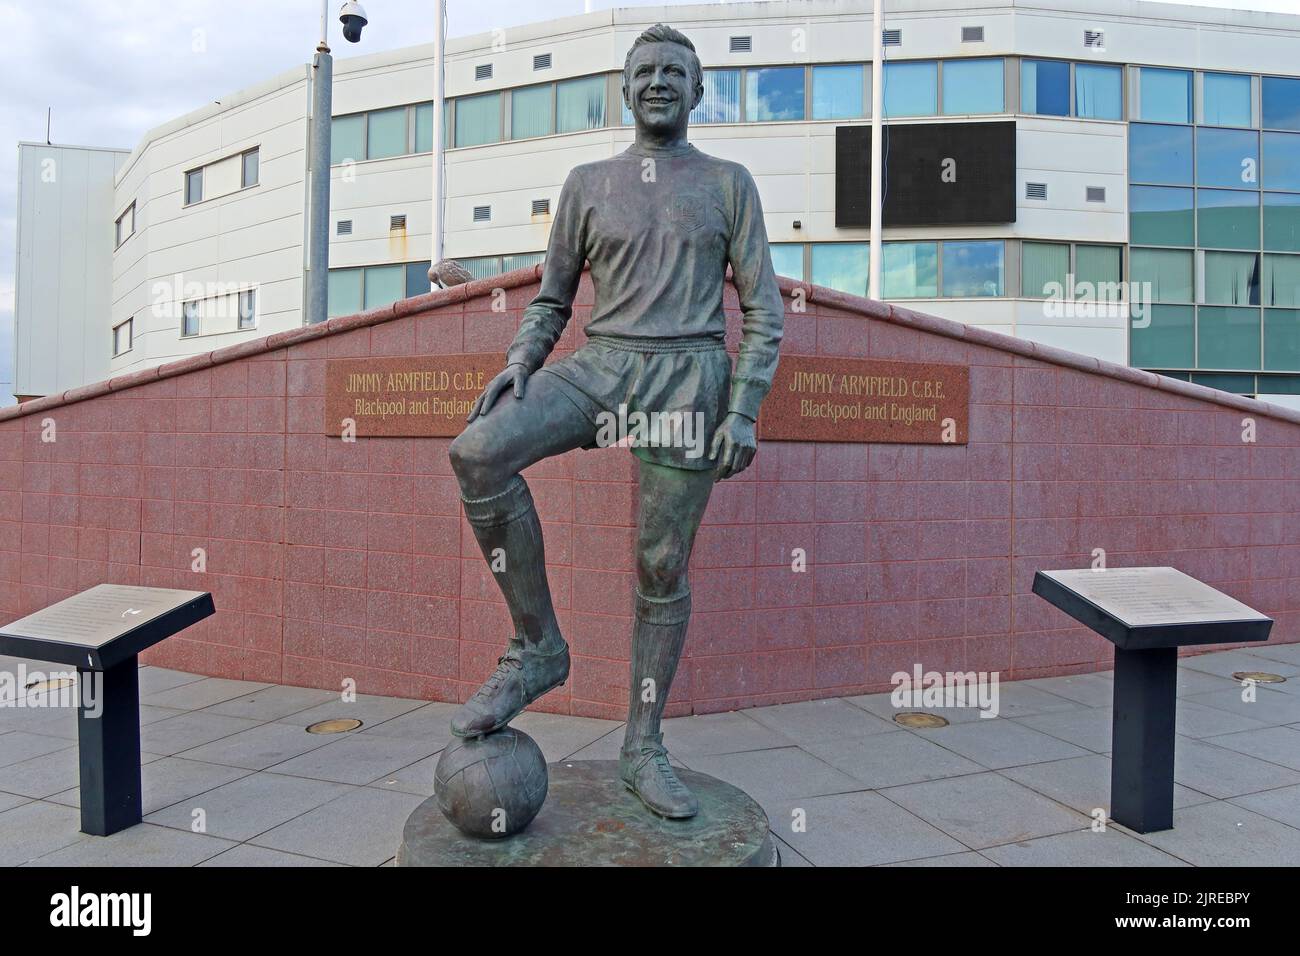 Jimmy Armfield (James Christopher Armfield) statue at Bloomfield Road, Blackpool, Lancs, England, UK, FY1 6JJ, by Sculptor Les Johnson Stock Photo